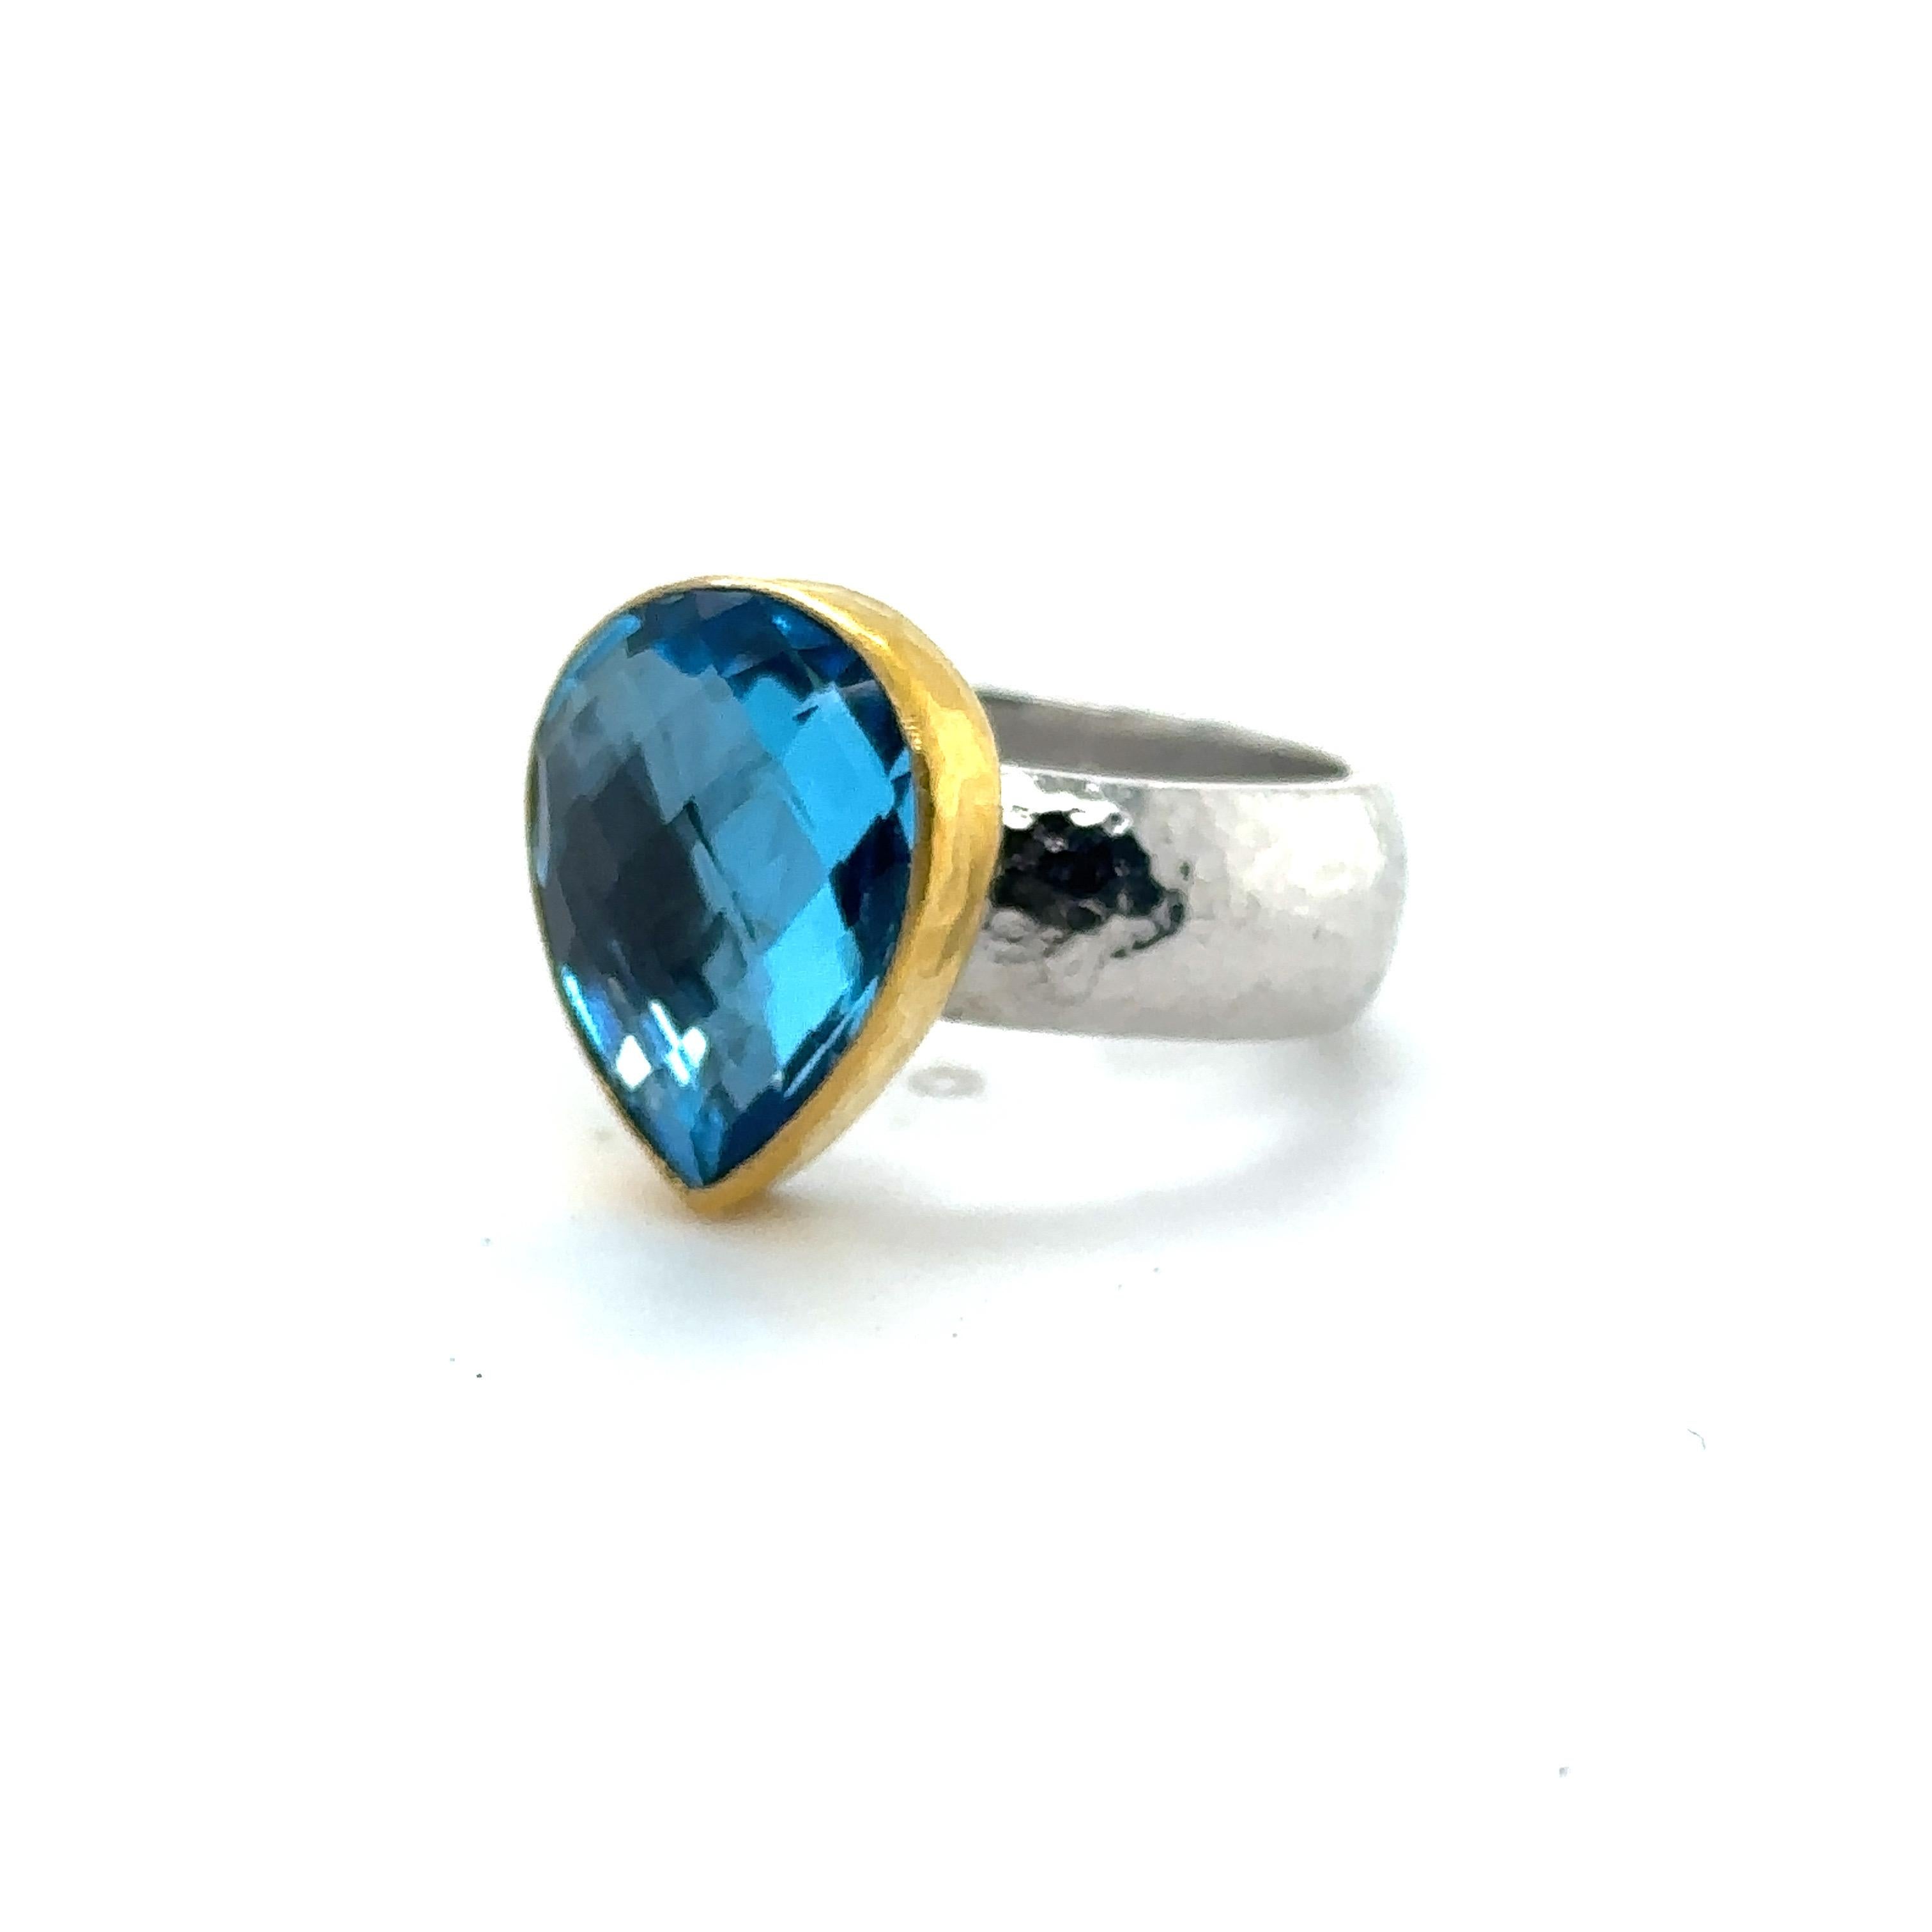 JAS-19-1918 - 24KT GOLD/SS RING with PEAR SHAPE SWISS BLUE TOPAZ For Sale 4